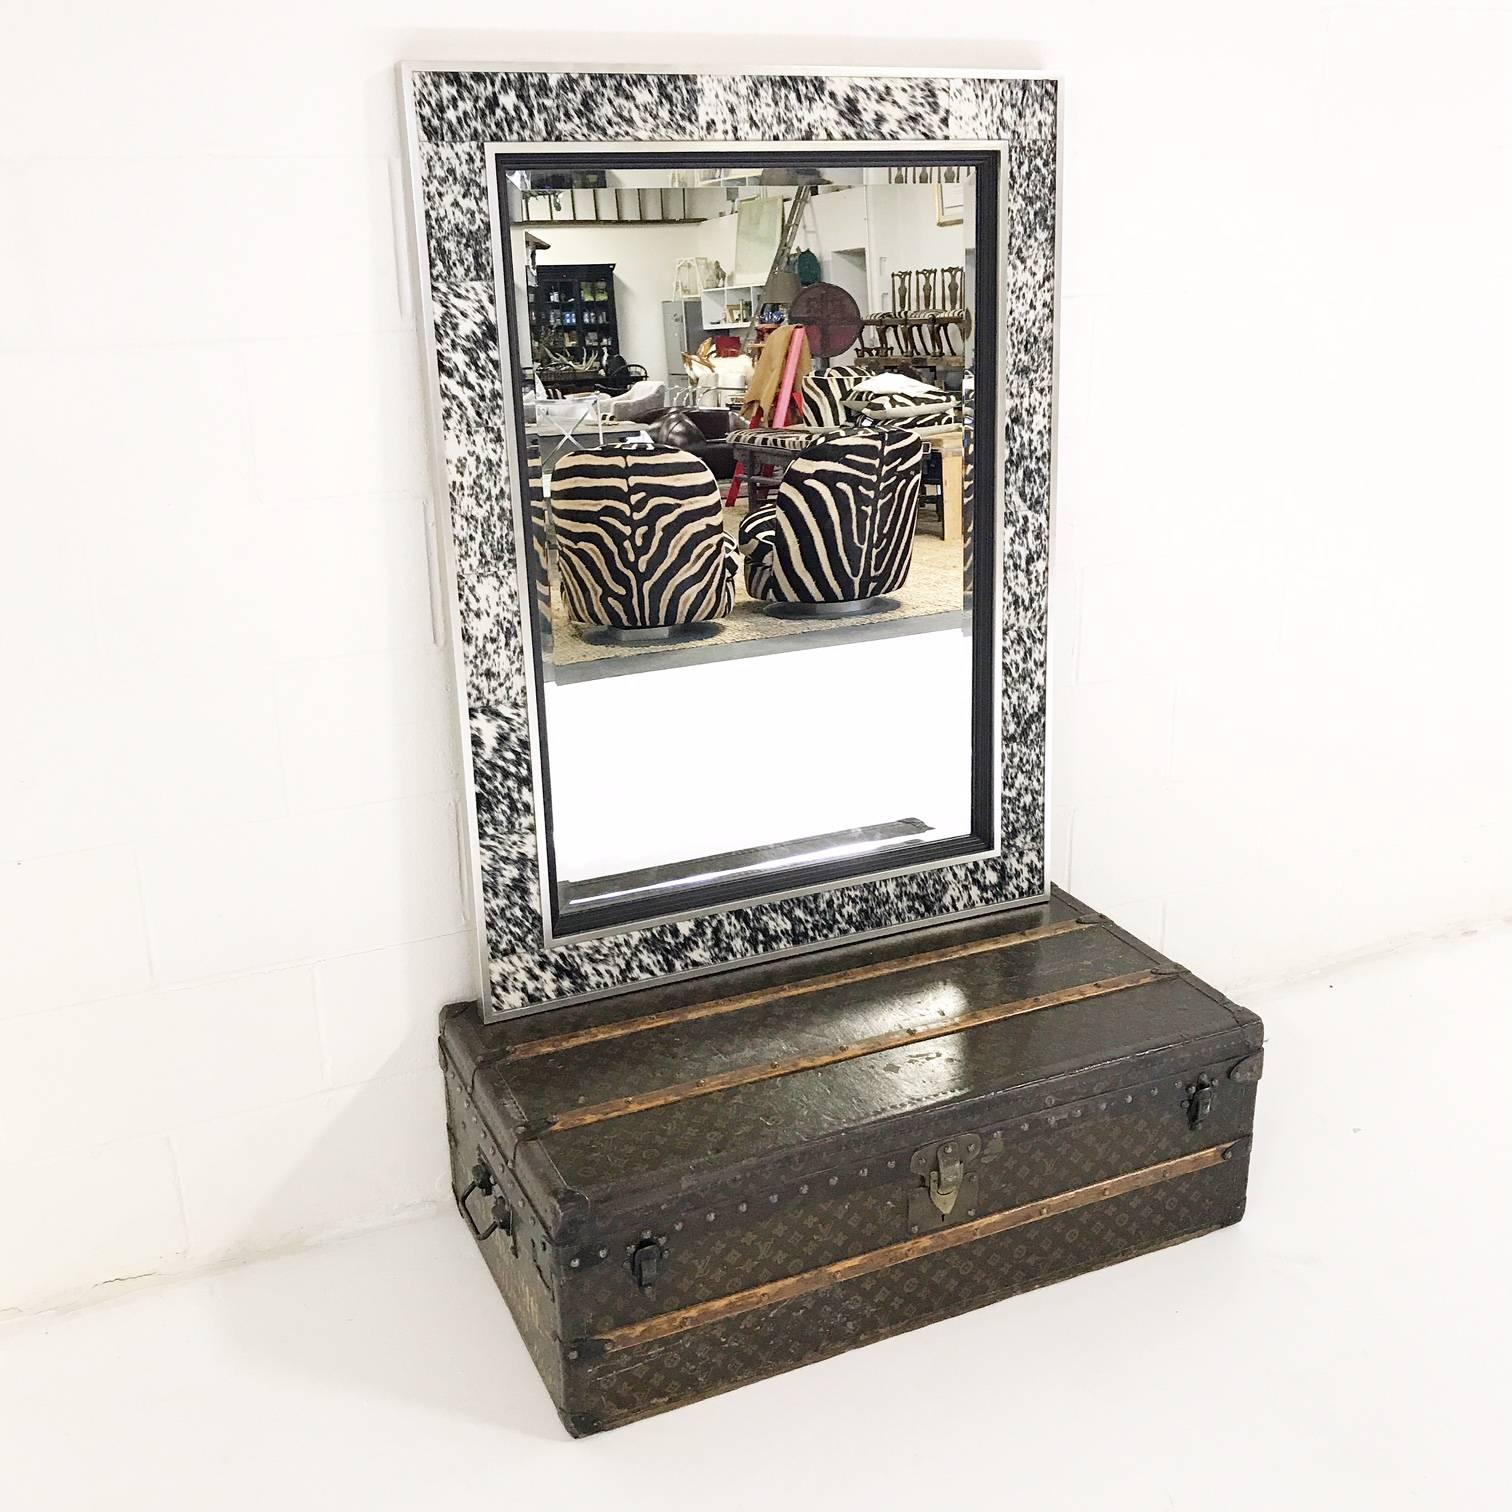 The black specked cowhide and silver finished frame pack a glamorous punch in any room. The beveled mirror adds sophistication and brilliance. Beautiful!

Details:
36 inches wide x 48 inches high 
100% natural cowhide
Ready to hang.